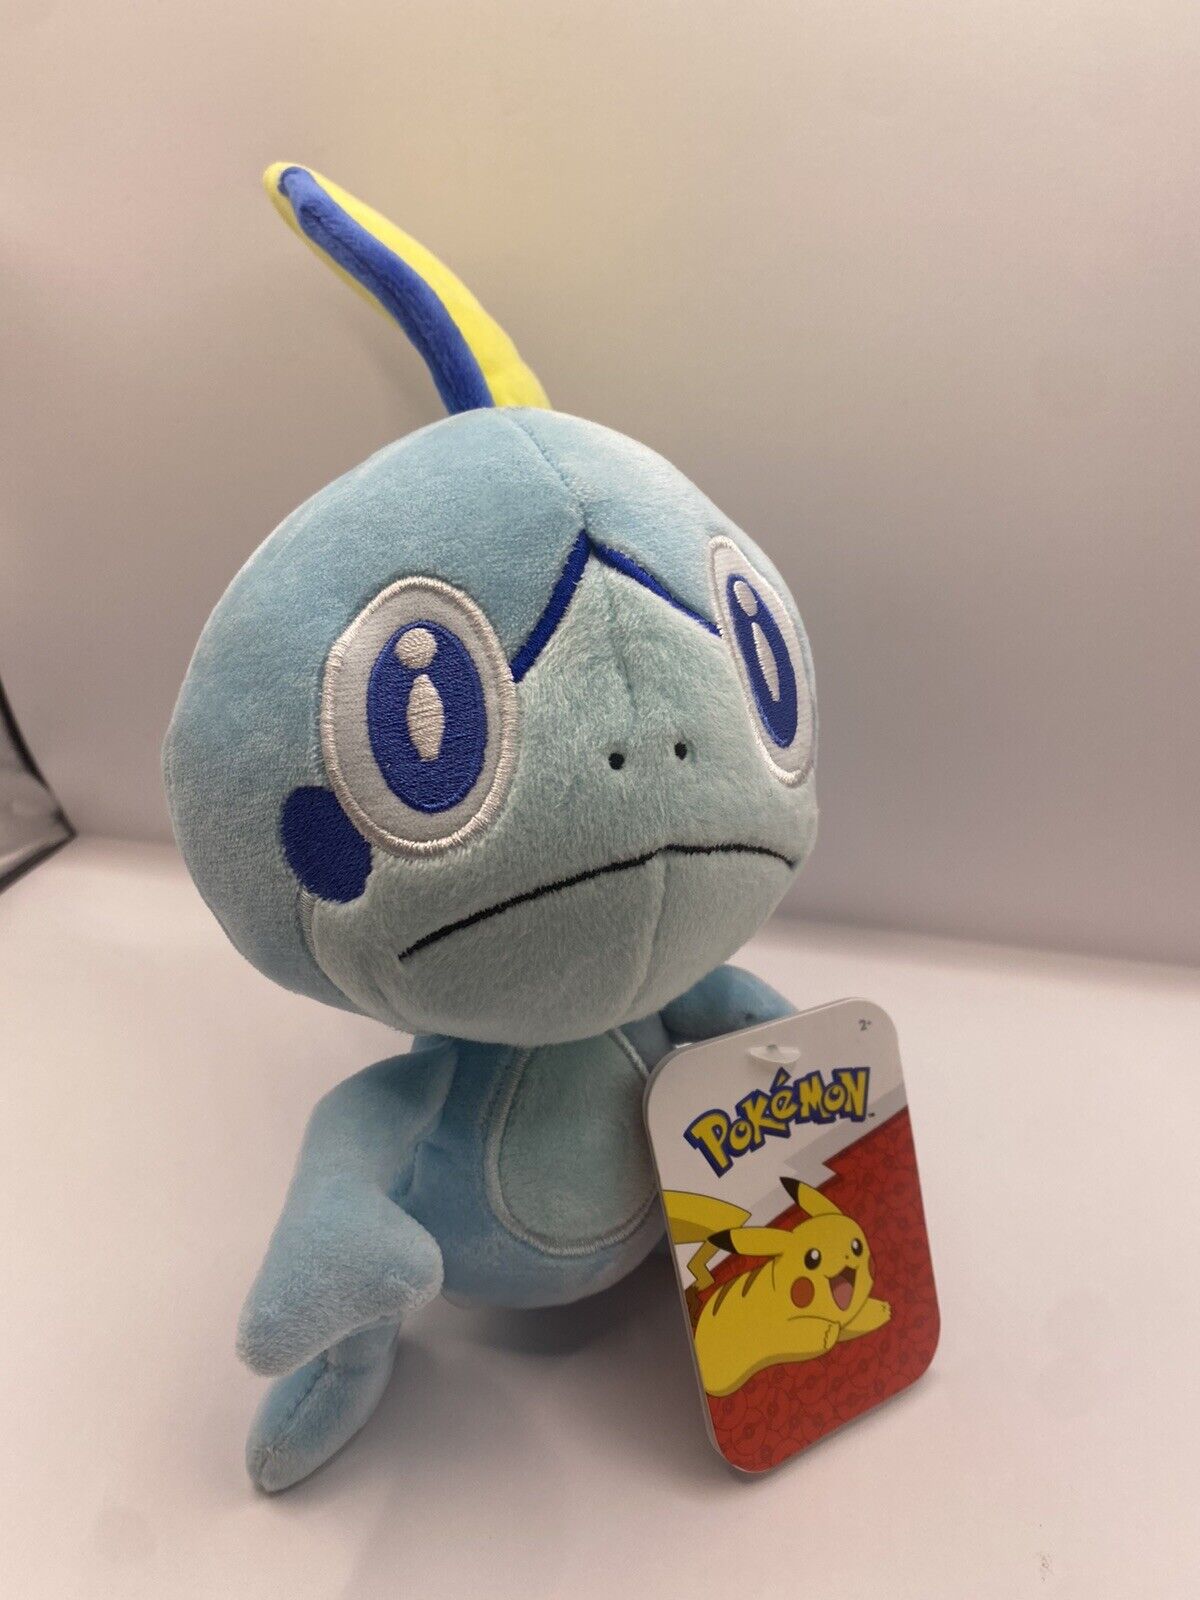 Pokémon Sobble Plush Doll Stuffed Toy Brand New Official Licensed New With Tag